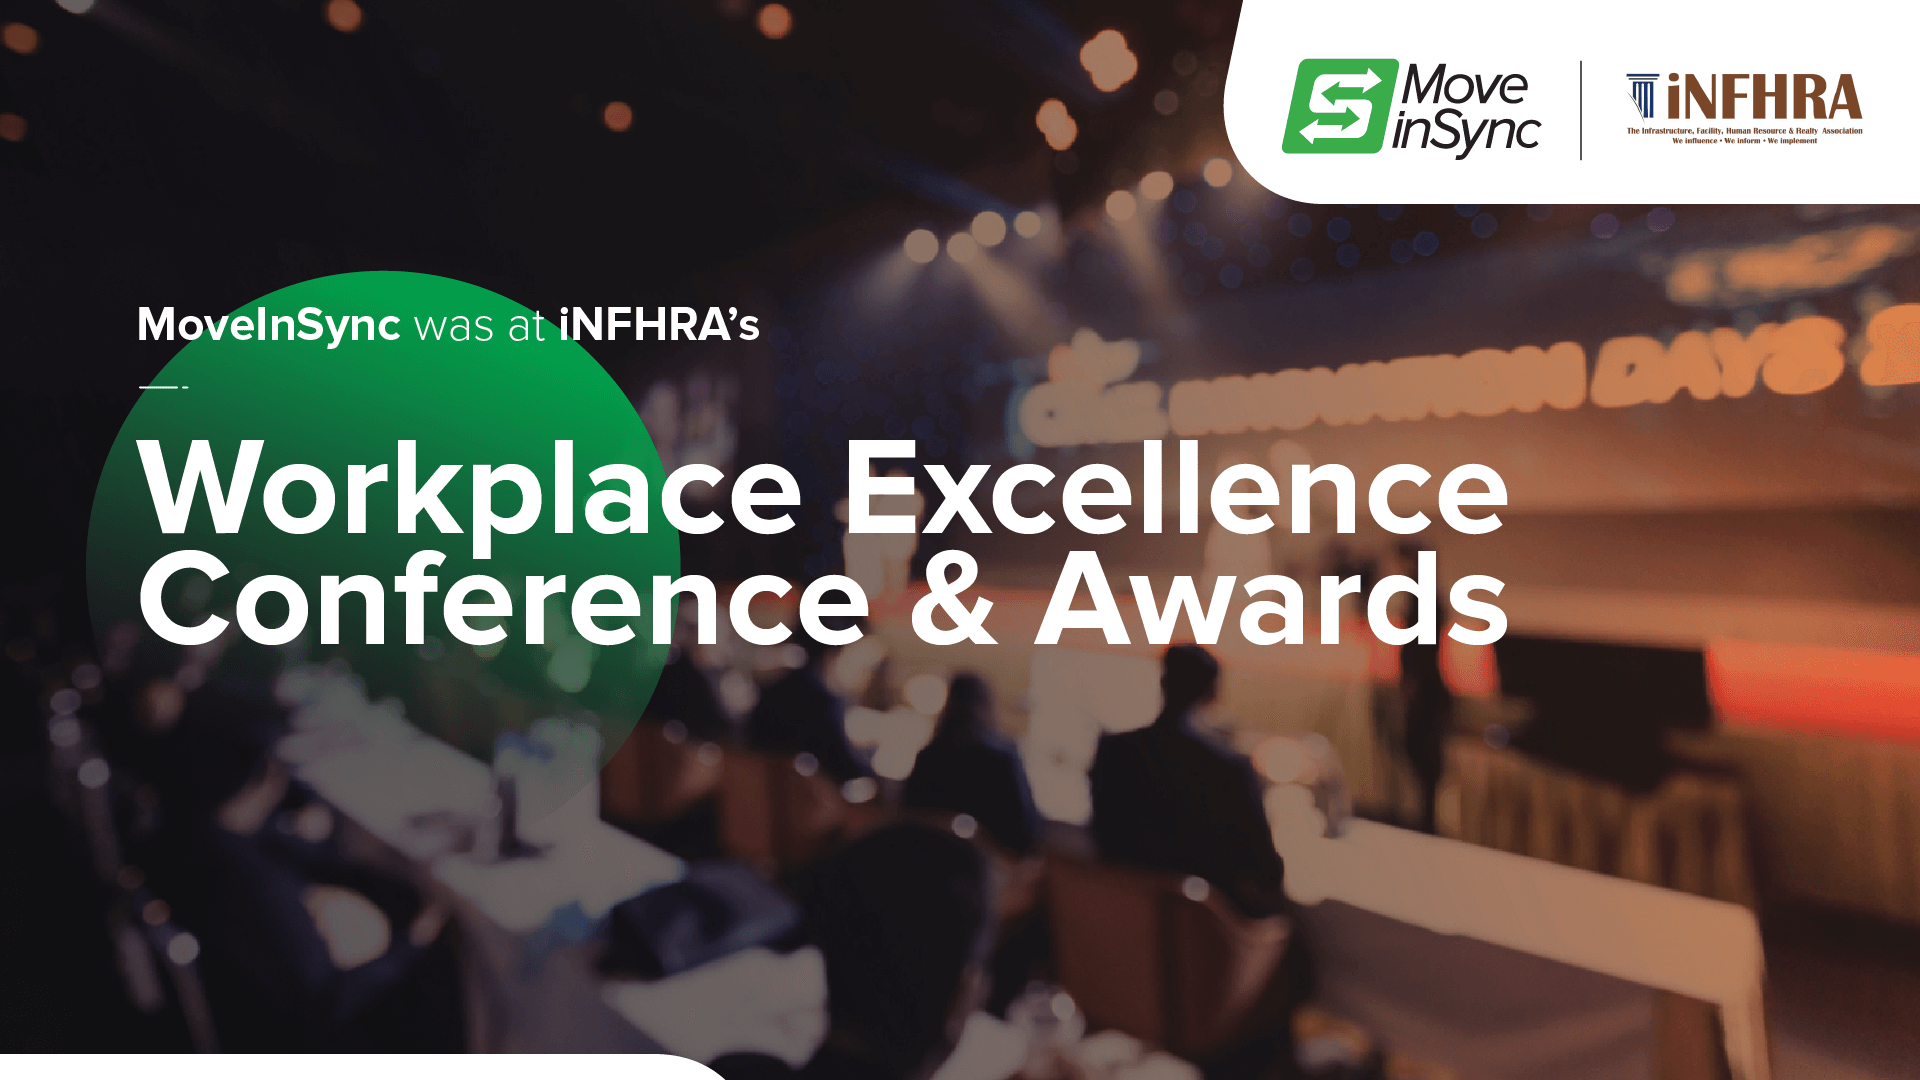 iNFHRA Workplace Excellence Conference & Awards